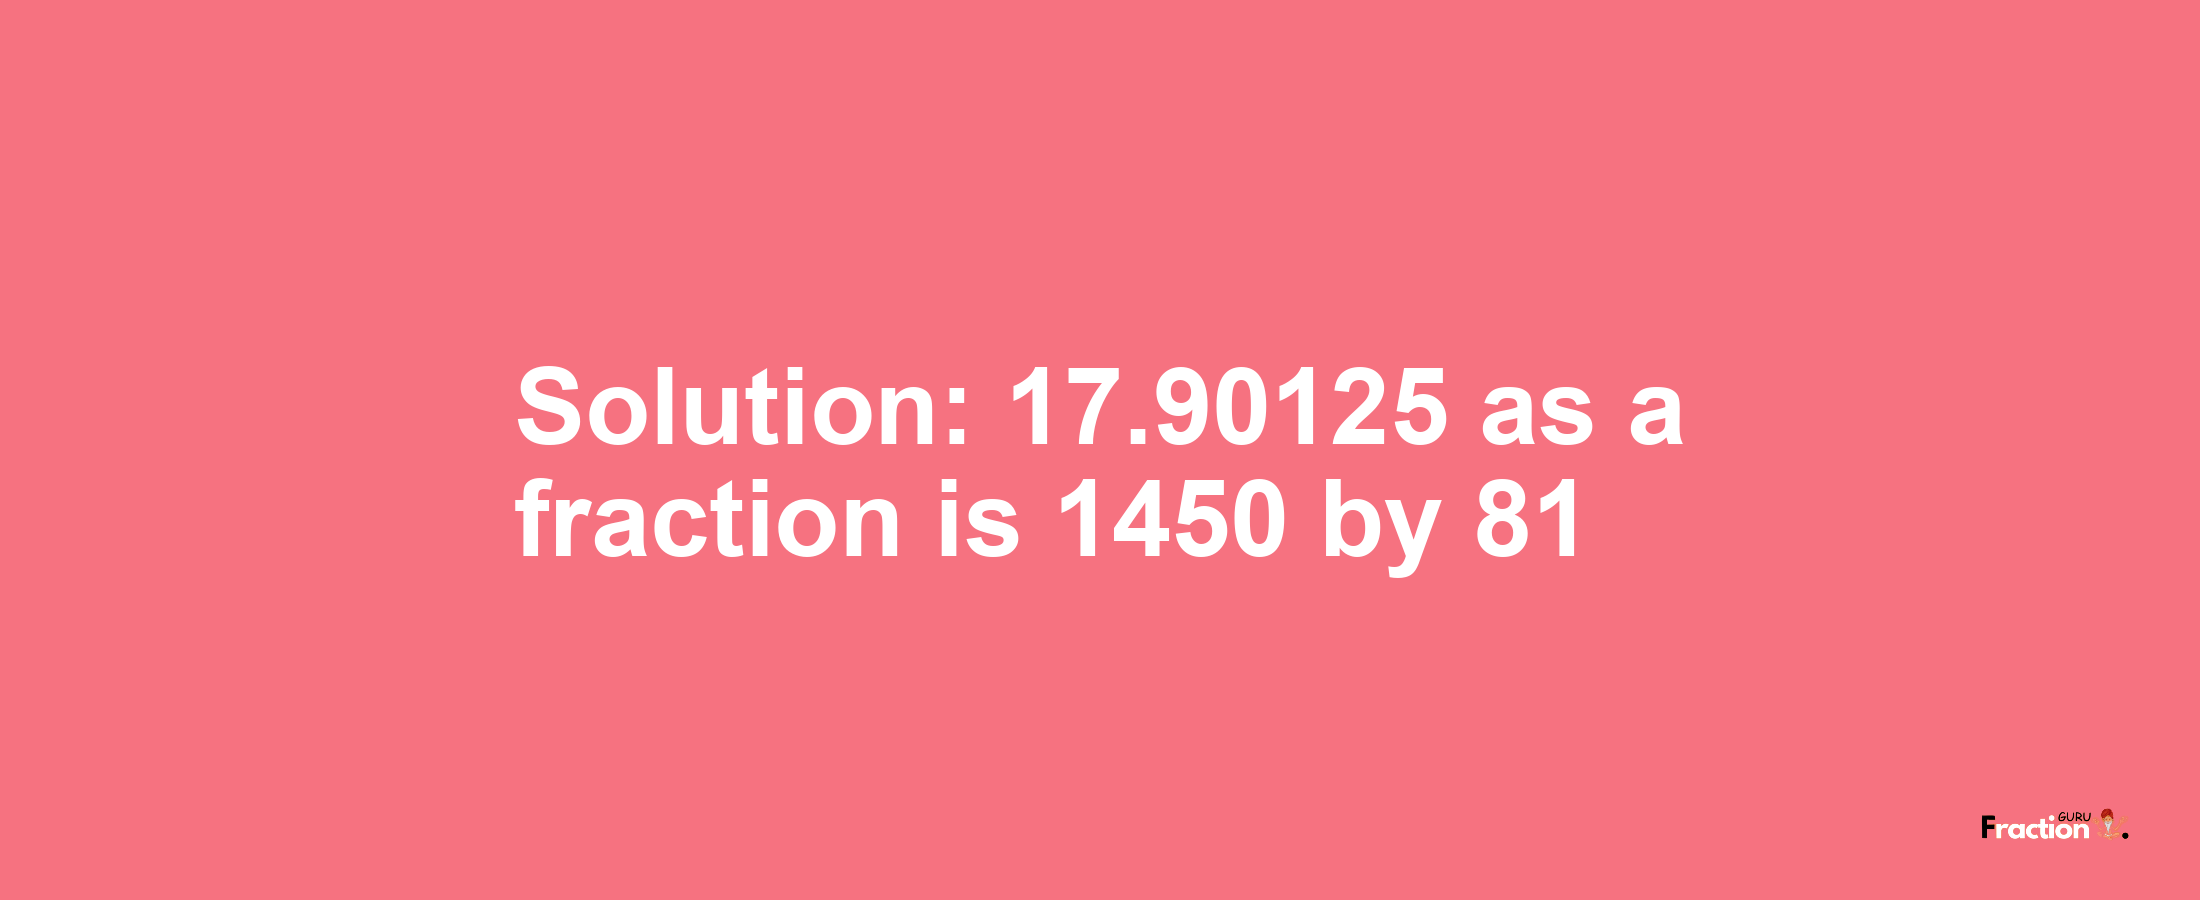 Solution:17.90125 as a fraction is 1450/81